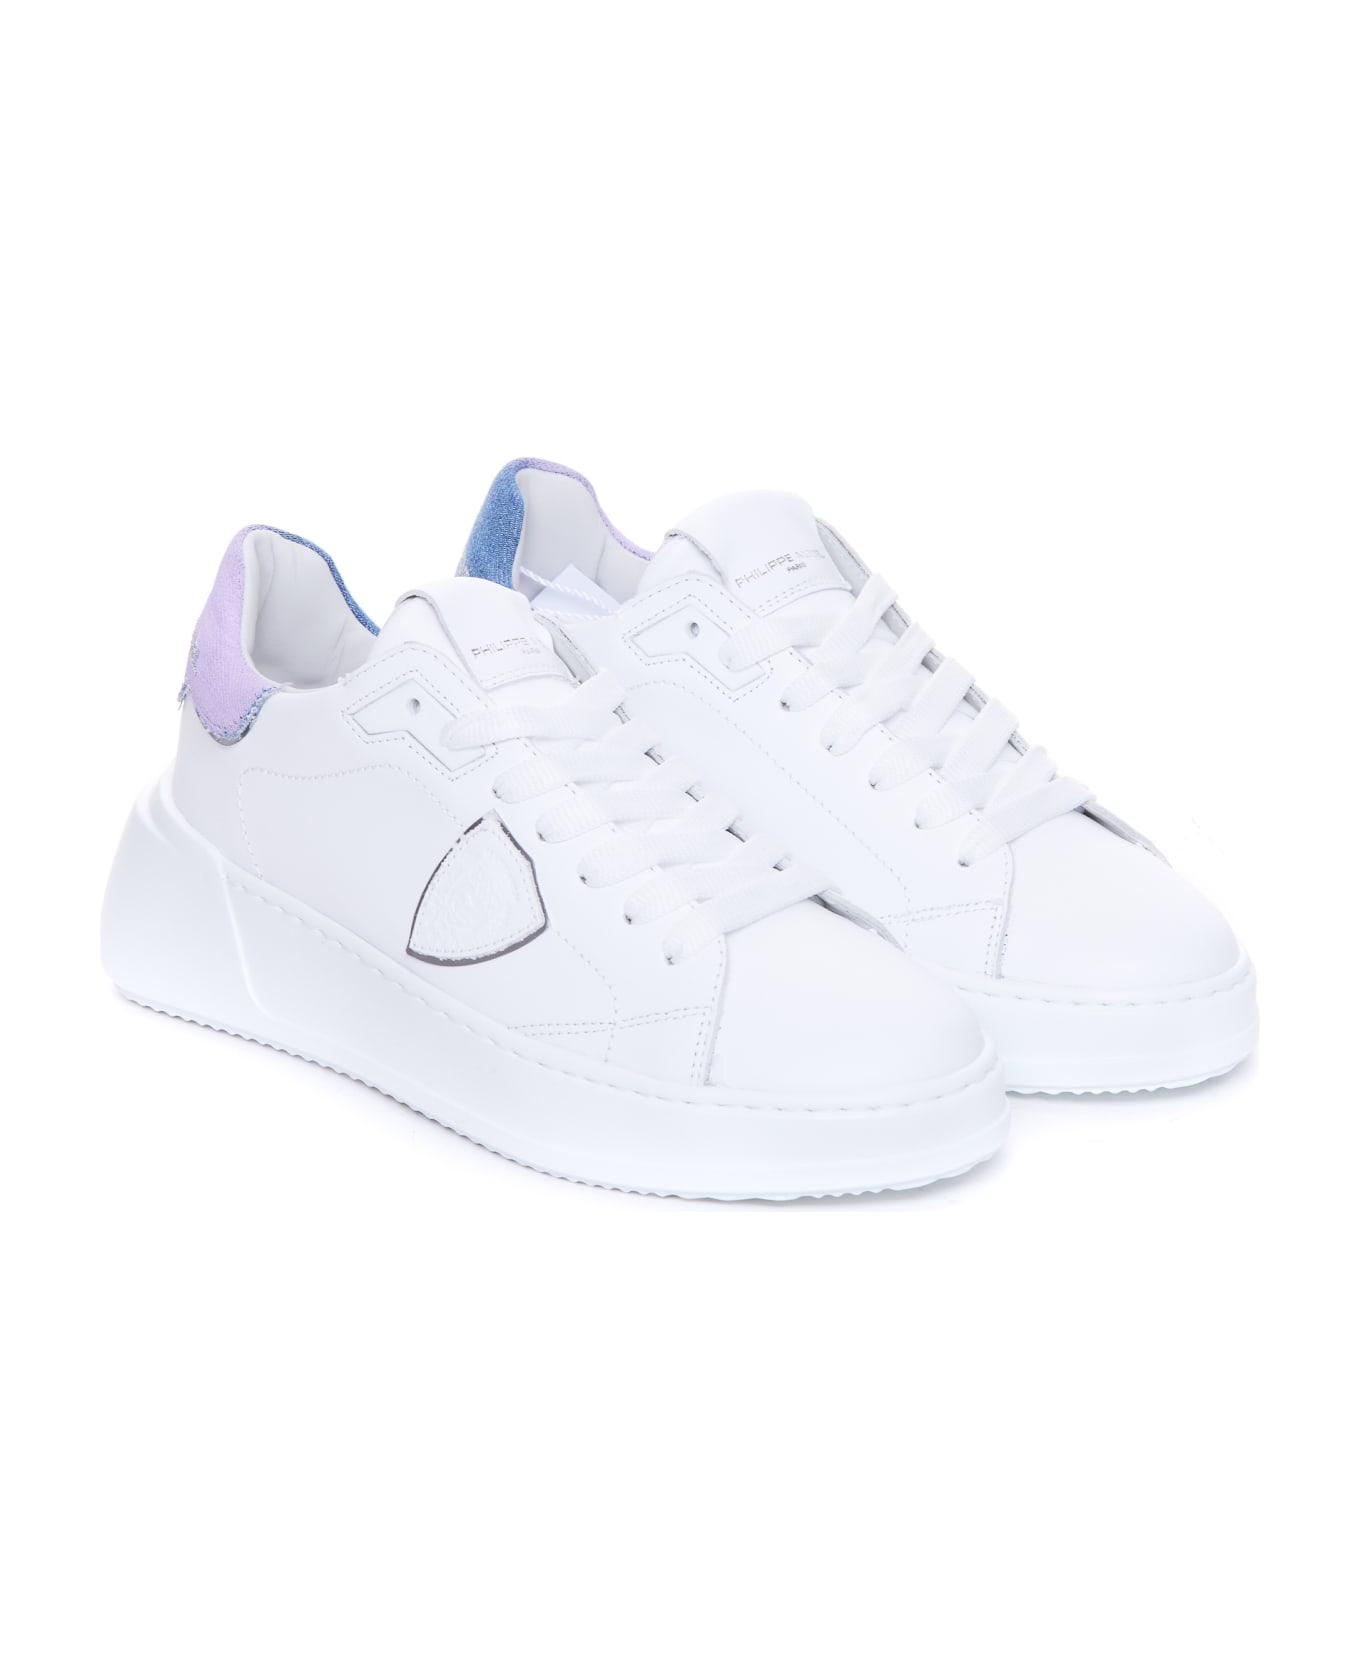 Philippe Model Tres Temple Sneakers - White スニーカー